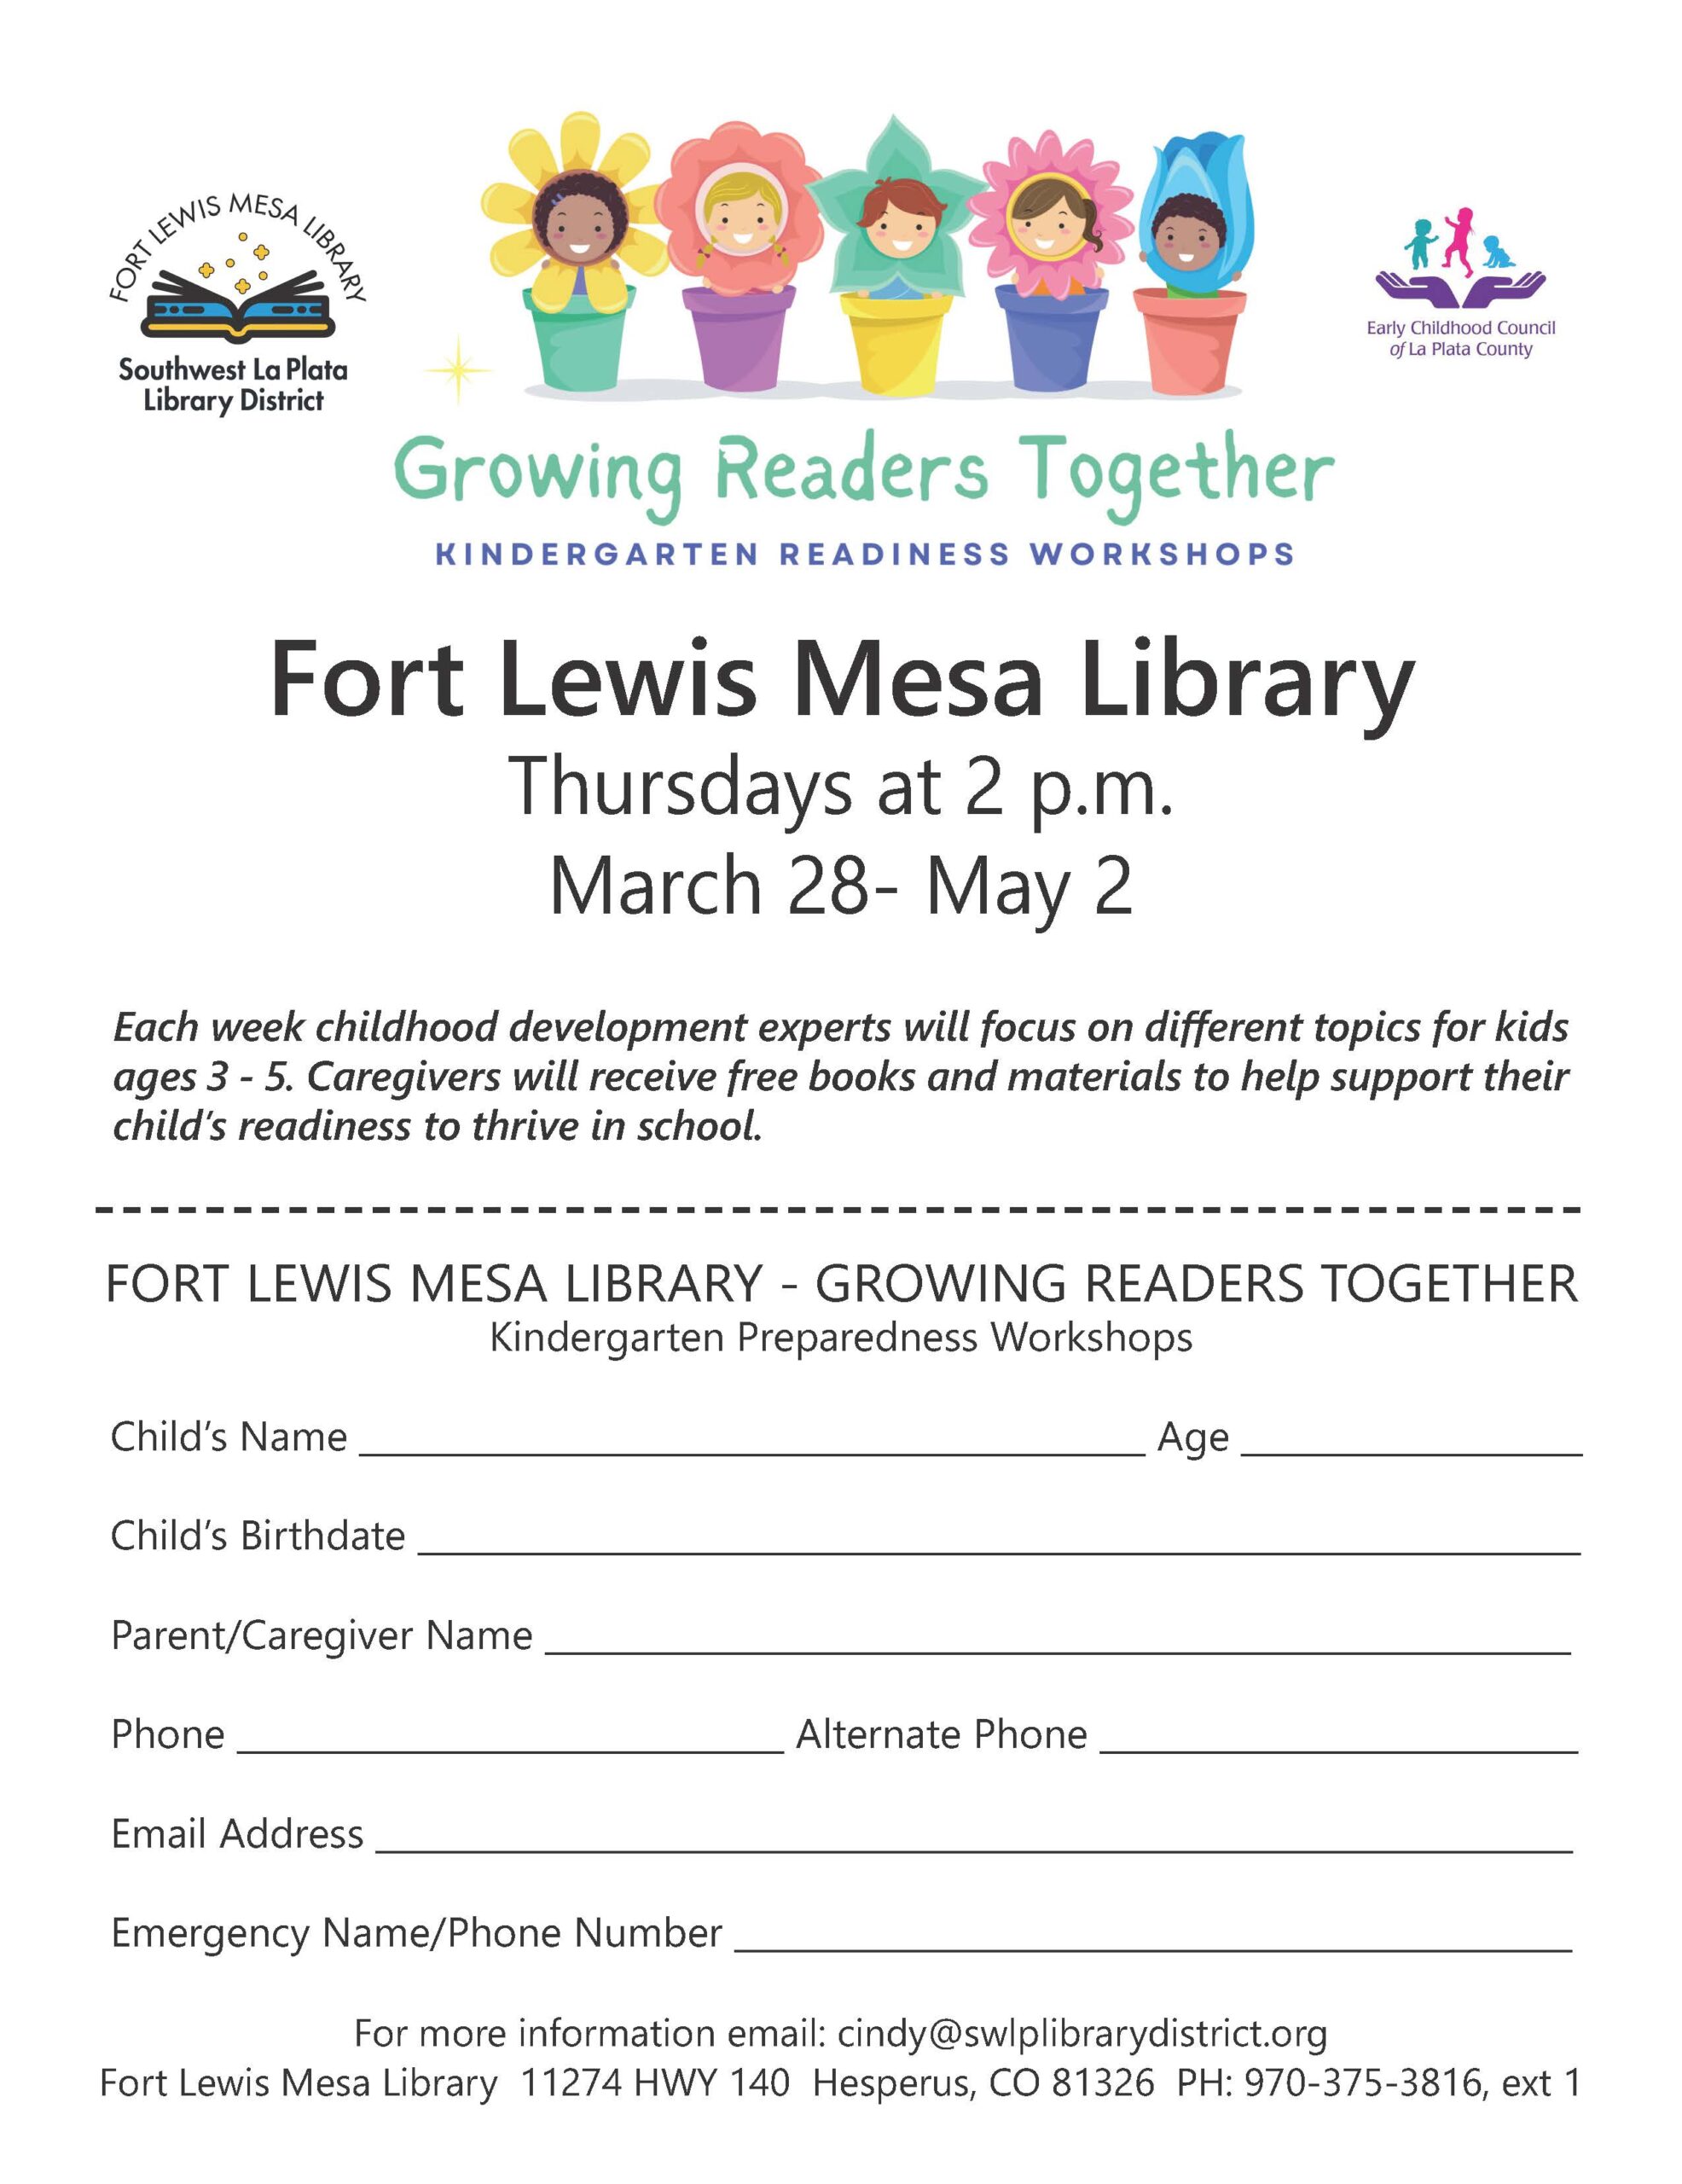 Five young children in flower pots with flowers as their hair sits above the text Growing Readers Together, Kindergarten Readiness Workshops, Fort Lewis Mesa Library, Thursdays at 2 pm, March 28-May 2. Each week childhood development experts will focus on different topics for kids ages 3-5. Caregivers will receive free books and materials to help support their child's readiness to thrive in school. The registration form asks for Child's Name:, Age:, Child's Birthdate:, Parent/Caregiver Name:, Phone:, Alternate Phone;, Email Address:, Emergency Name/Phone Number:,
For more information email: cindy@swlplibrarydistrict.org. Fort Lewis Mesa Library, 11274 HWY 140, Hesperus, CO 81326 PH: 970-375-3816, ext. 1